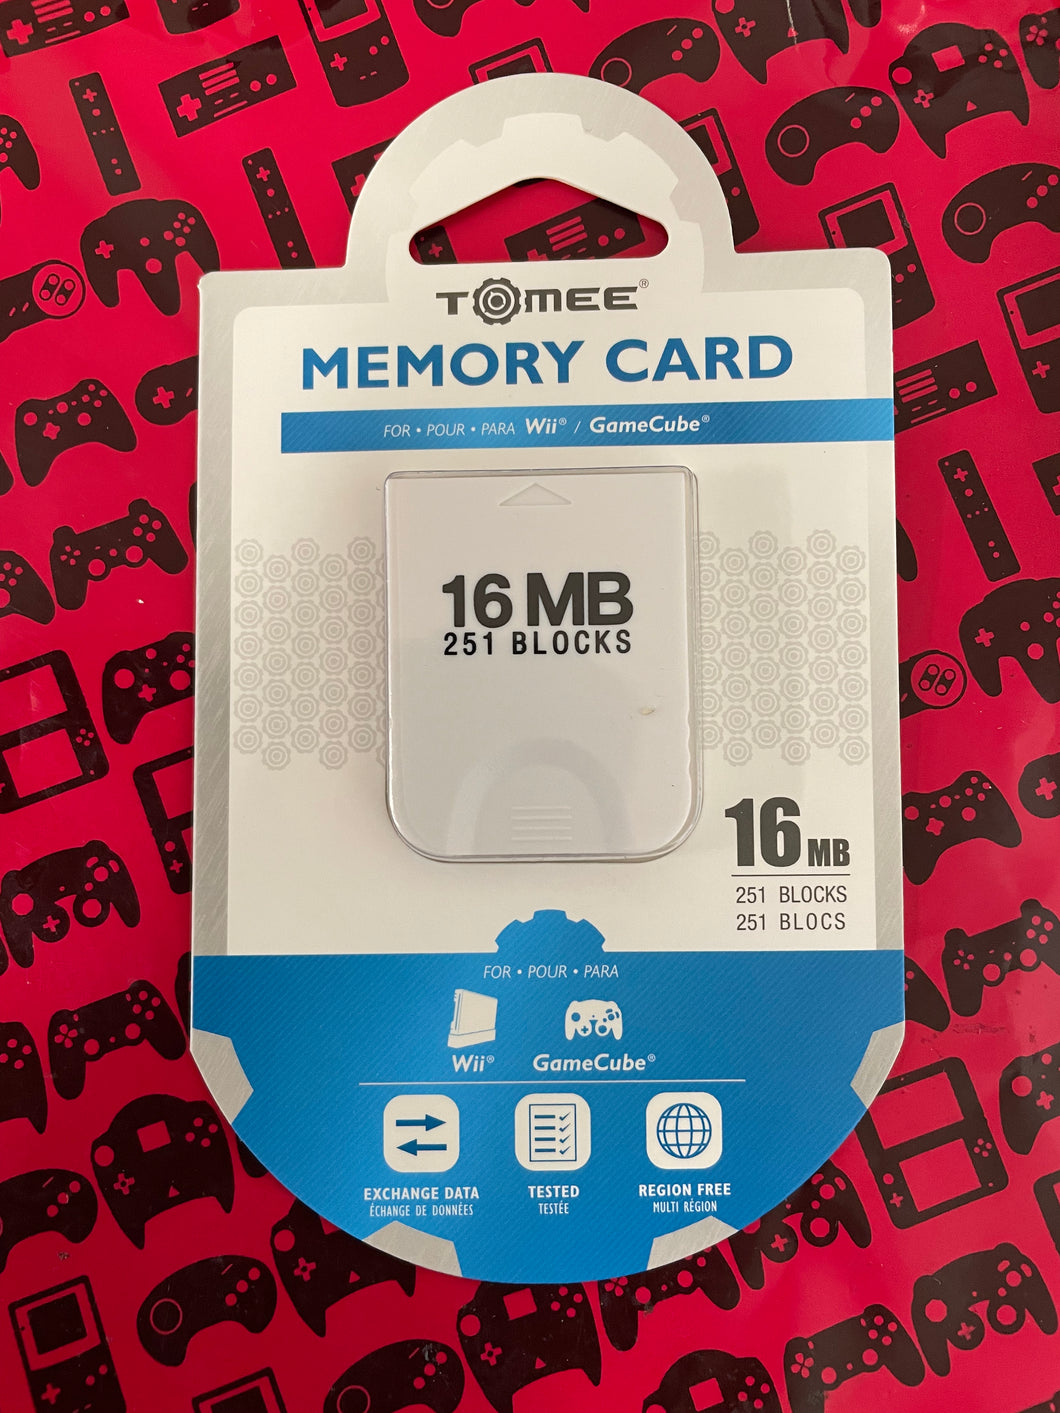 16MB Memory Card For GameCube / Wii